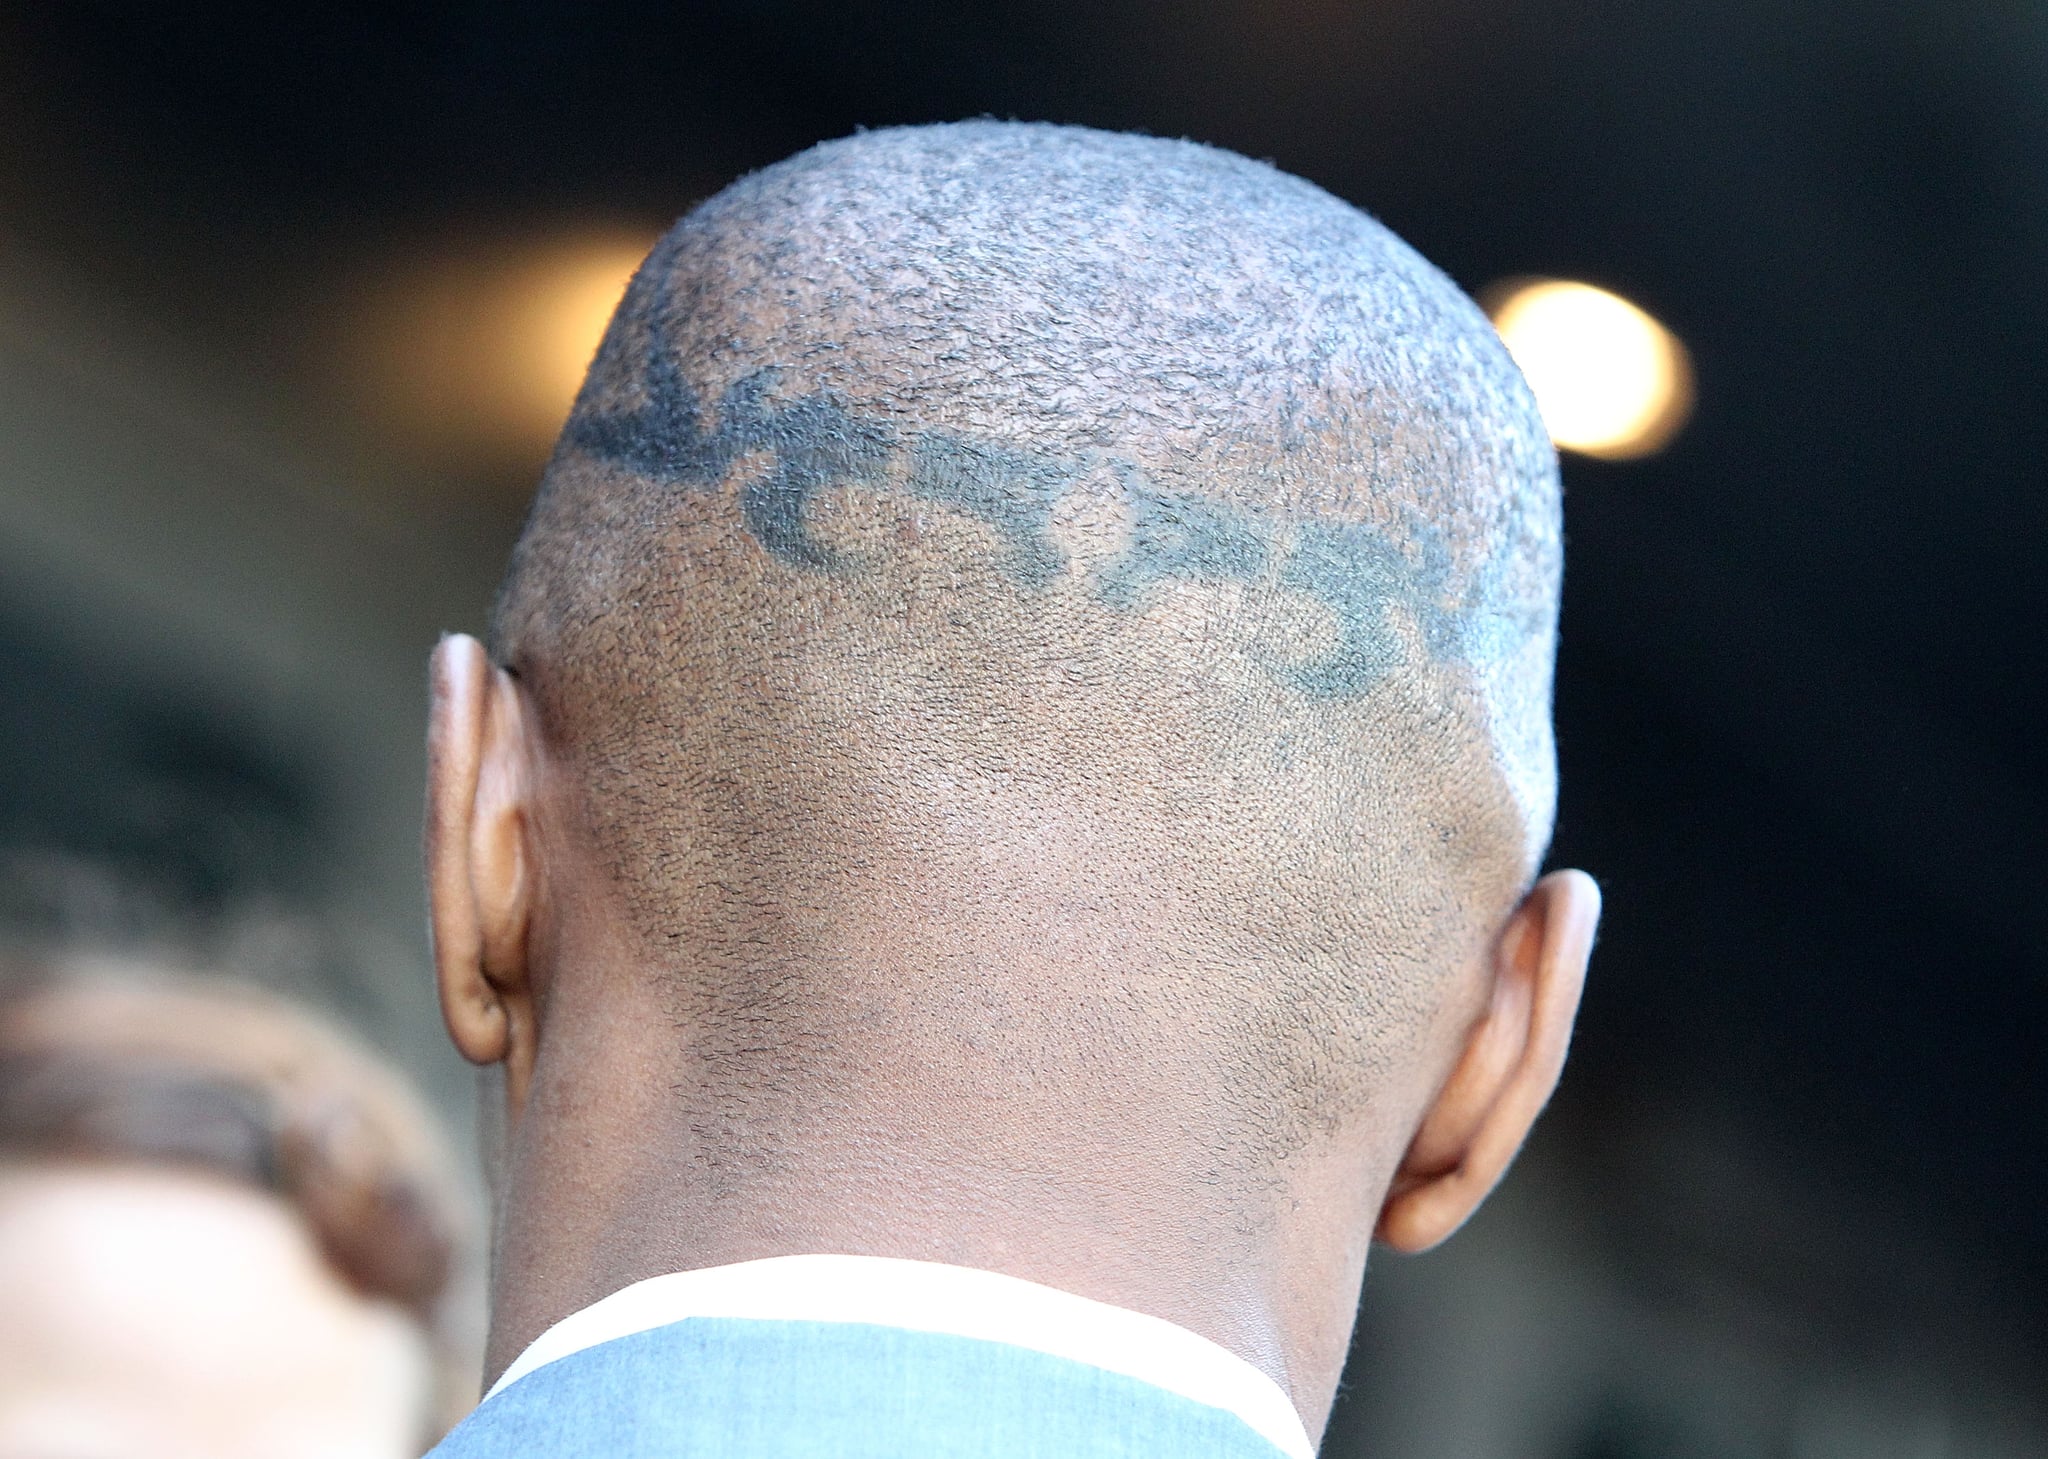 6. Jamie Foxx's tattoo of his son's name - wide 10